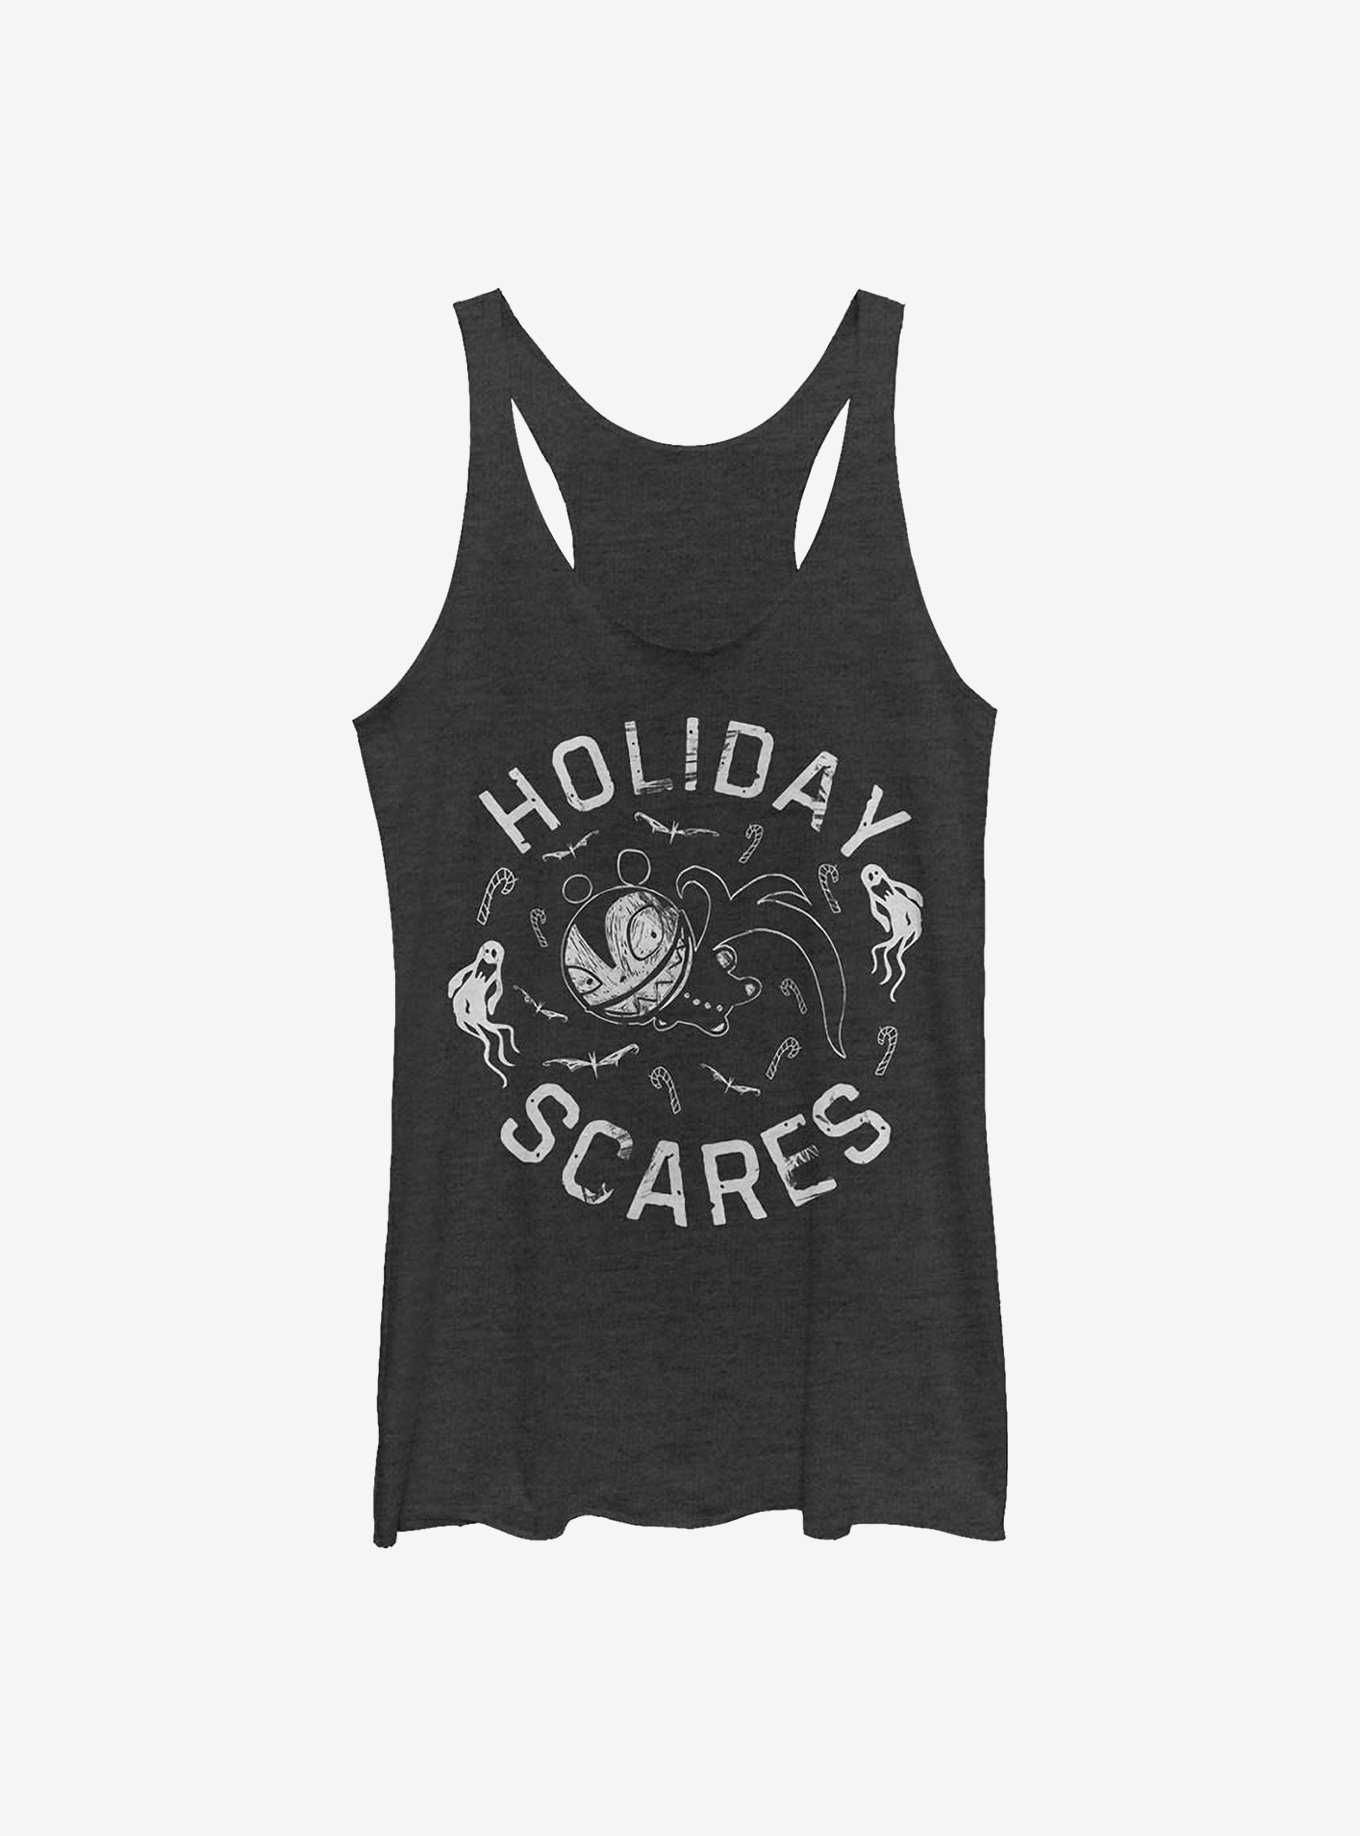 The Nightmare Before Christmas Holiday Scares Doll Girls Tank Top, , hi-res